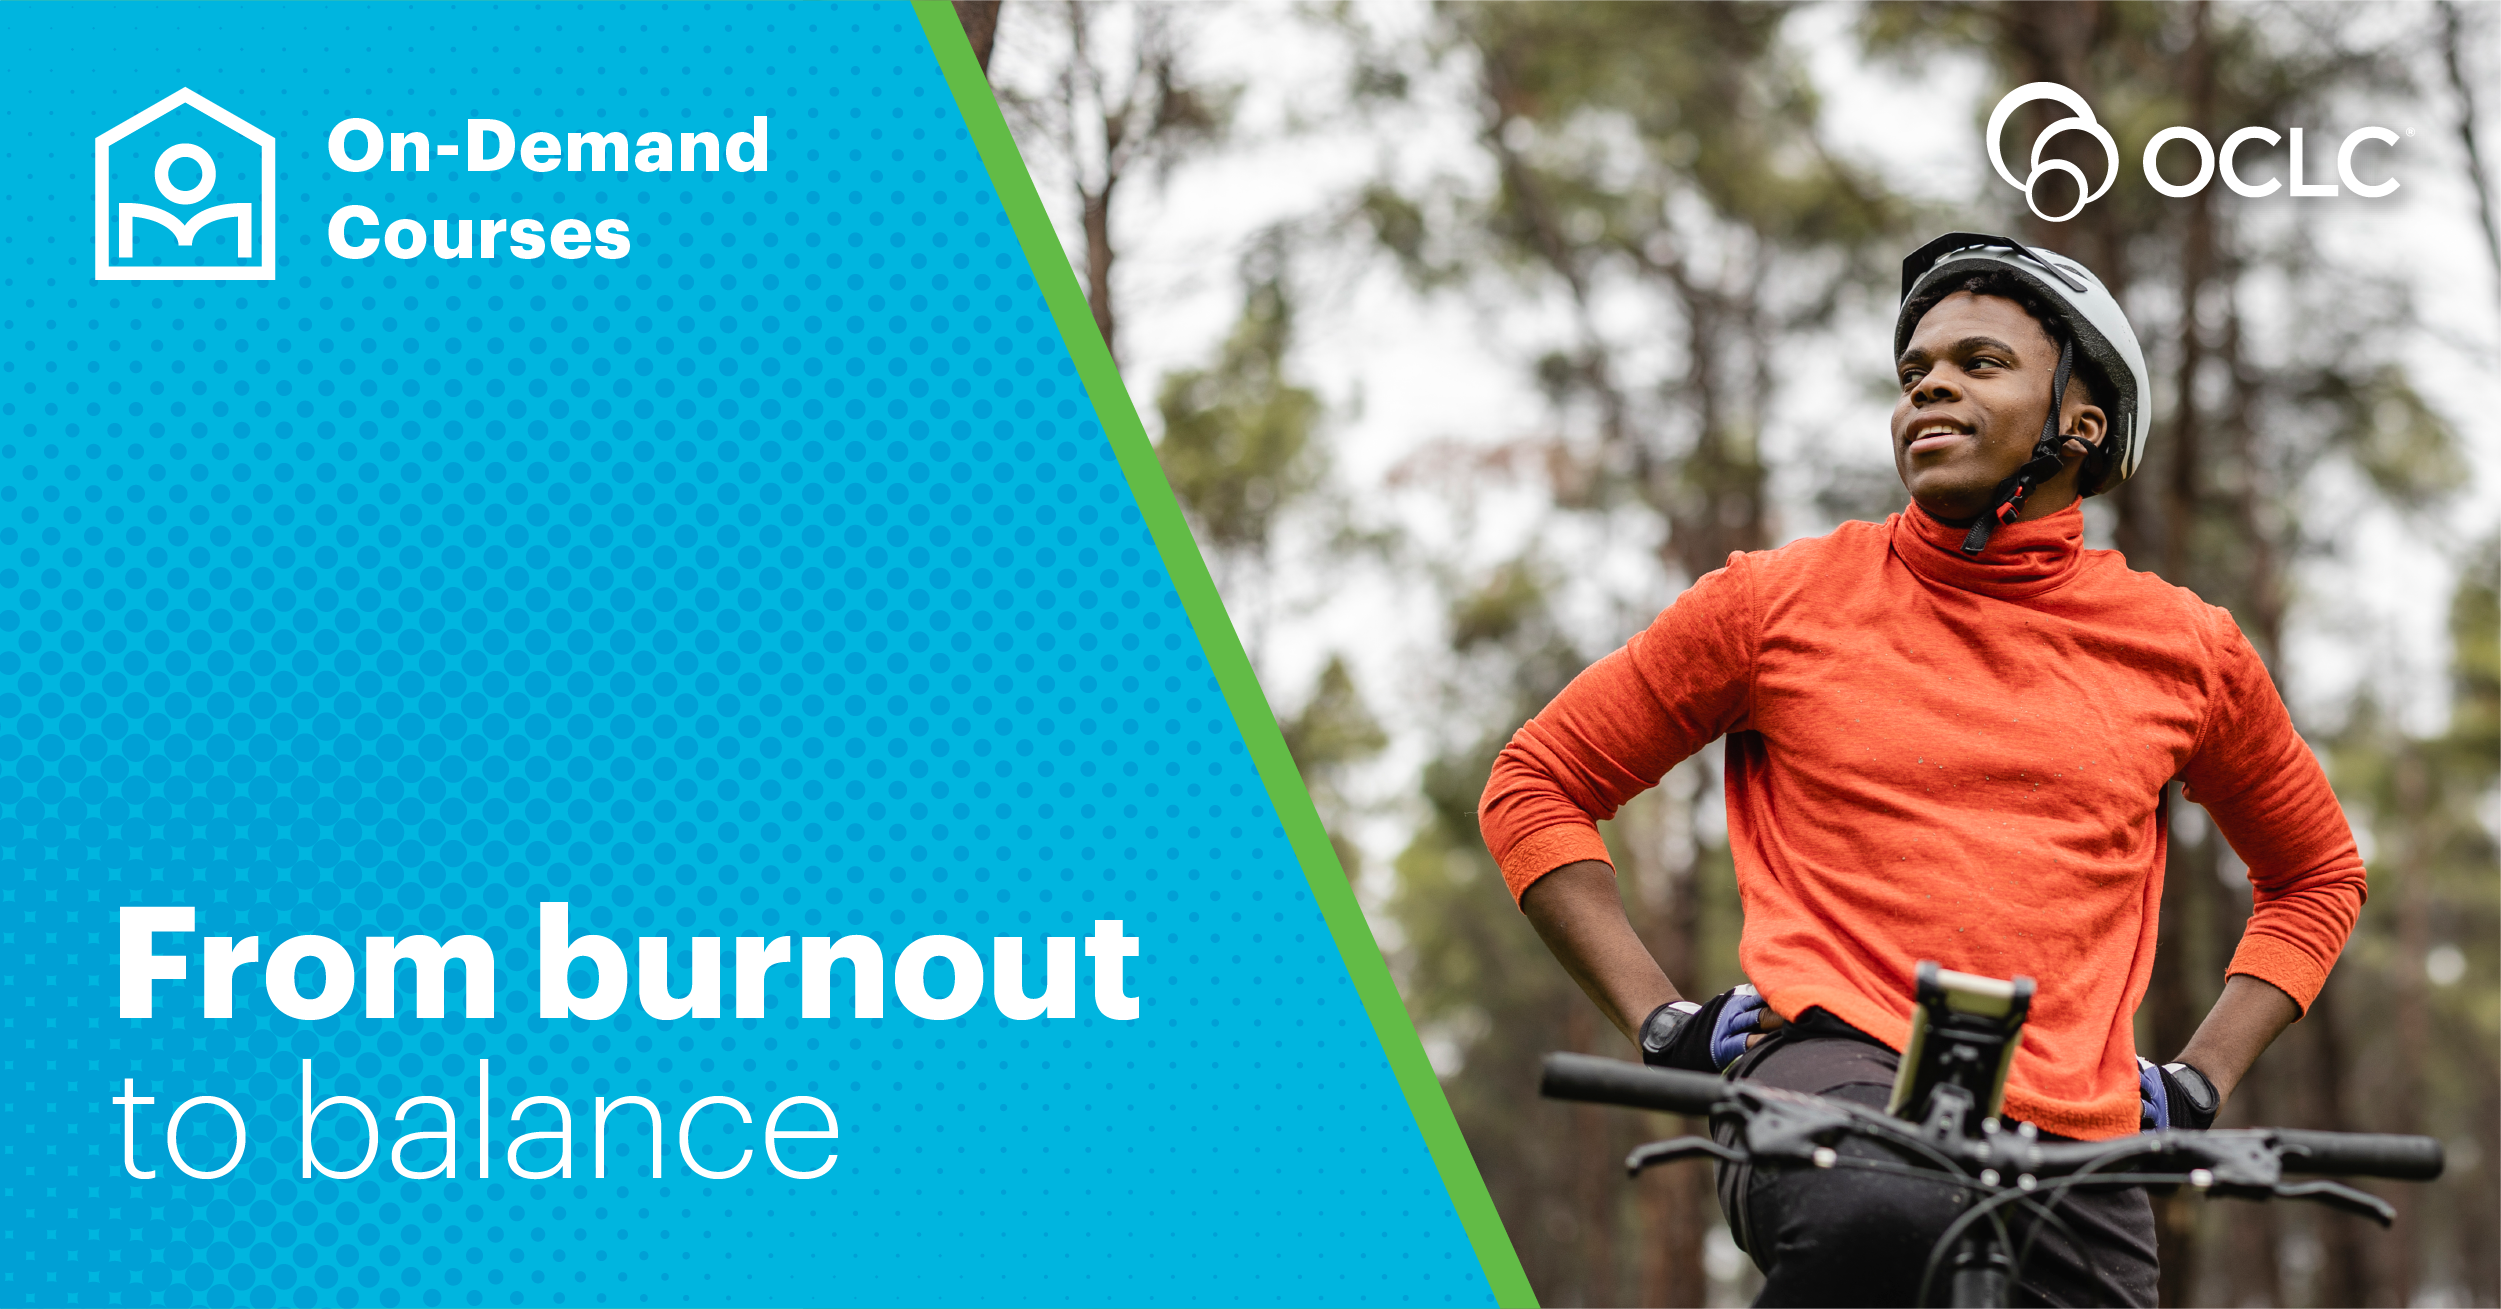 A man in brightly colored shirt riding a bicycle, with a border overlay and the words ‘on-demand-courses’ and ‘From burnout to balance’